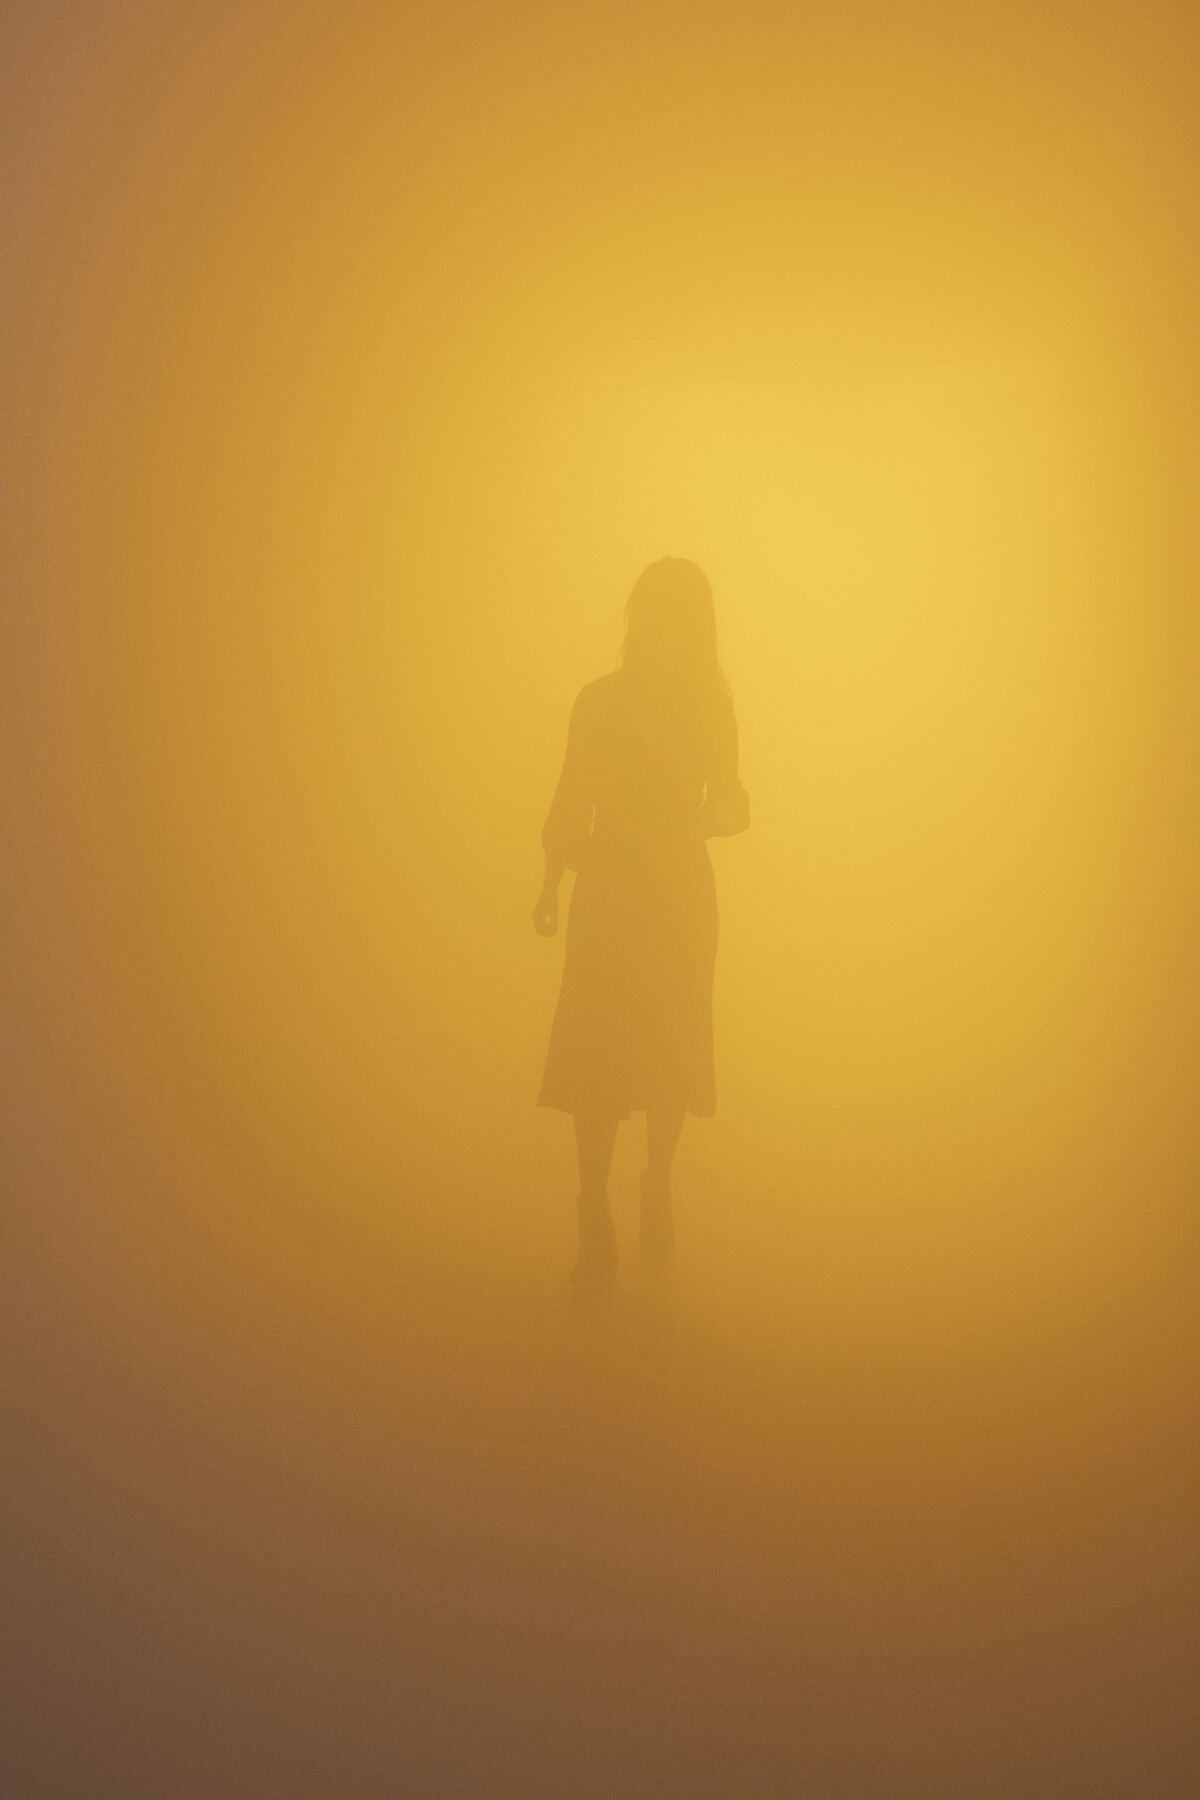 Olafur Eliasson, Your blind passenger, 2010. Photo by Anders Sune Berg. Courtesy of the Tate.